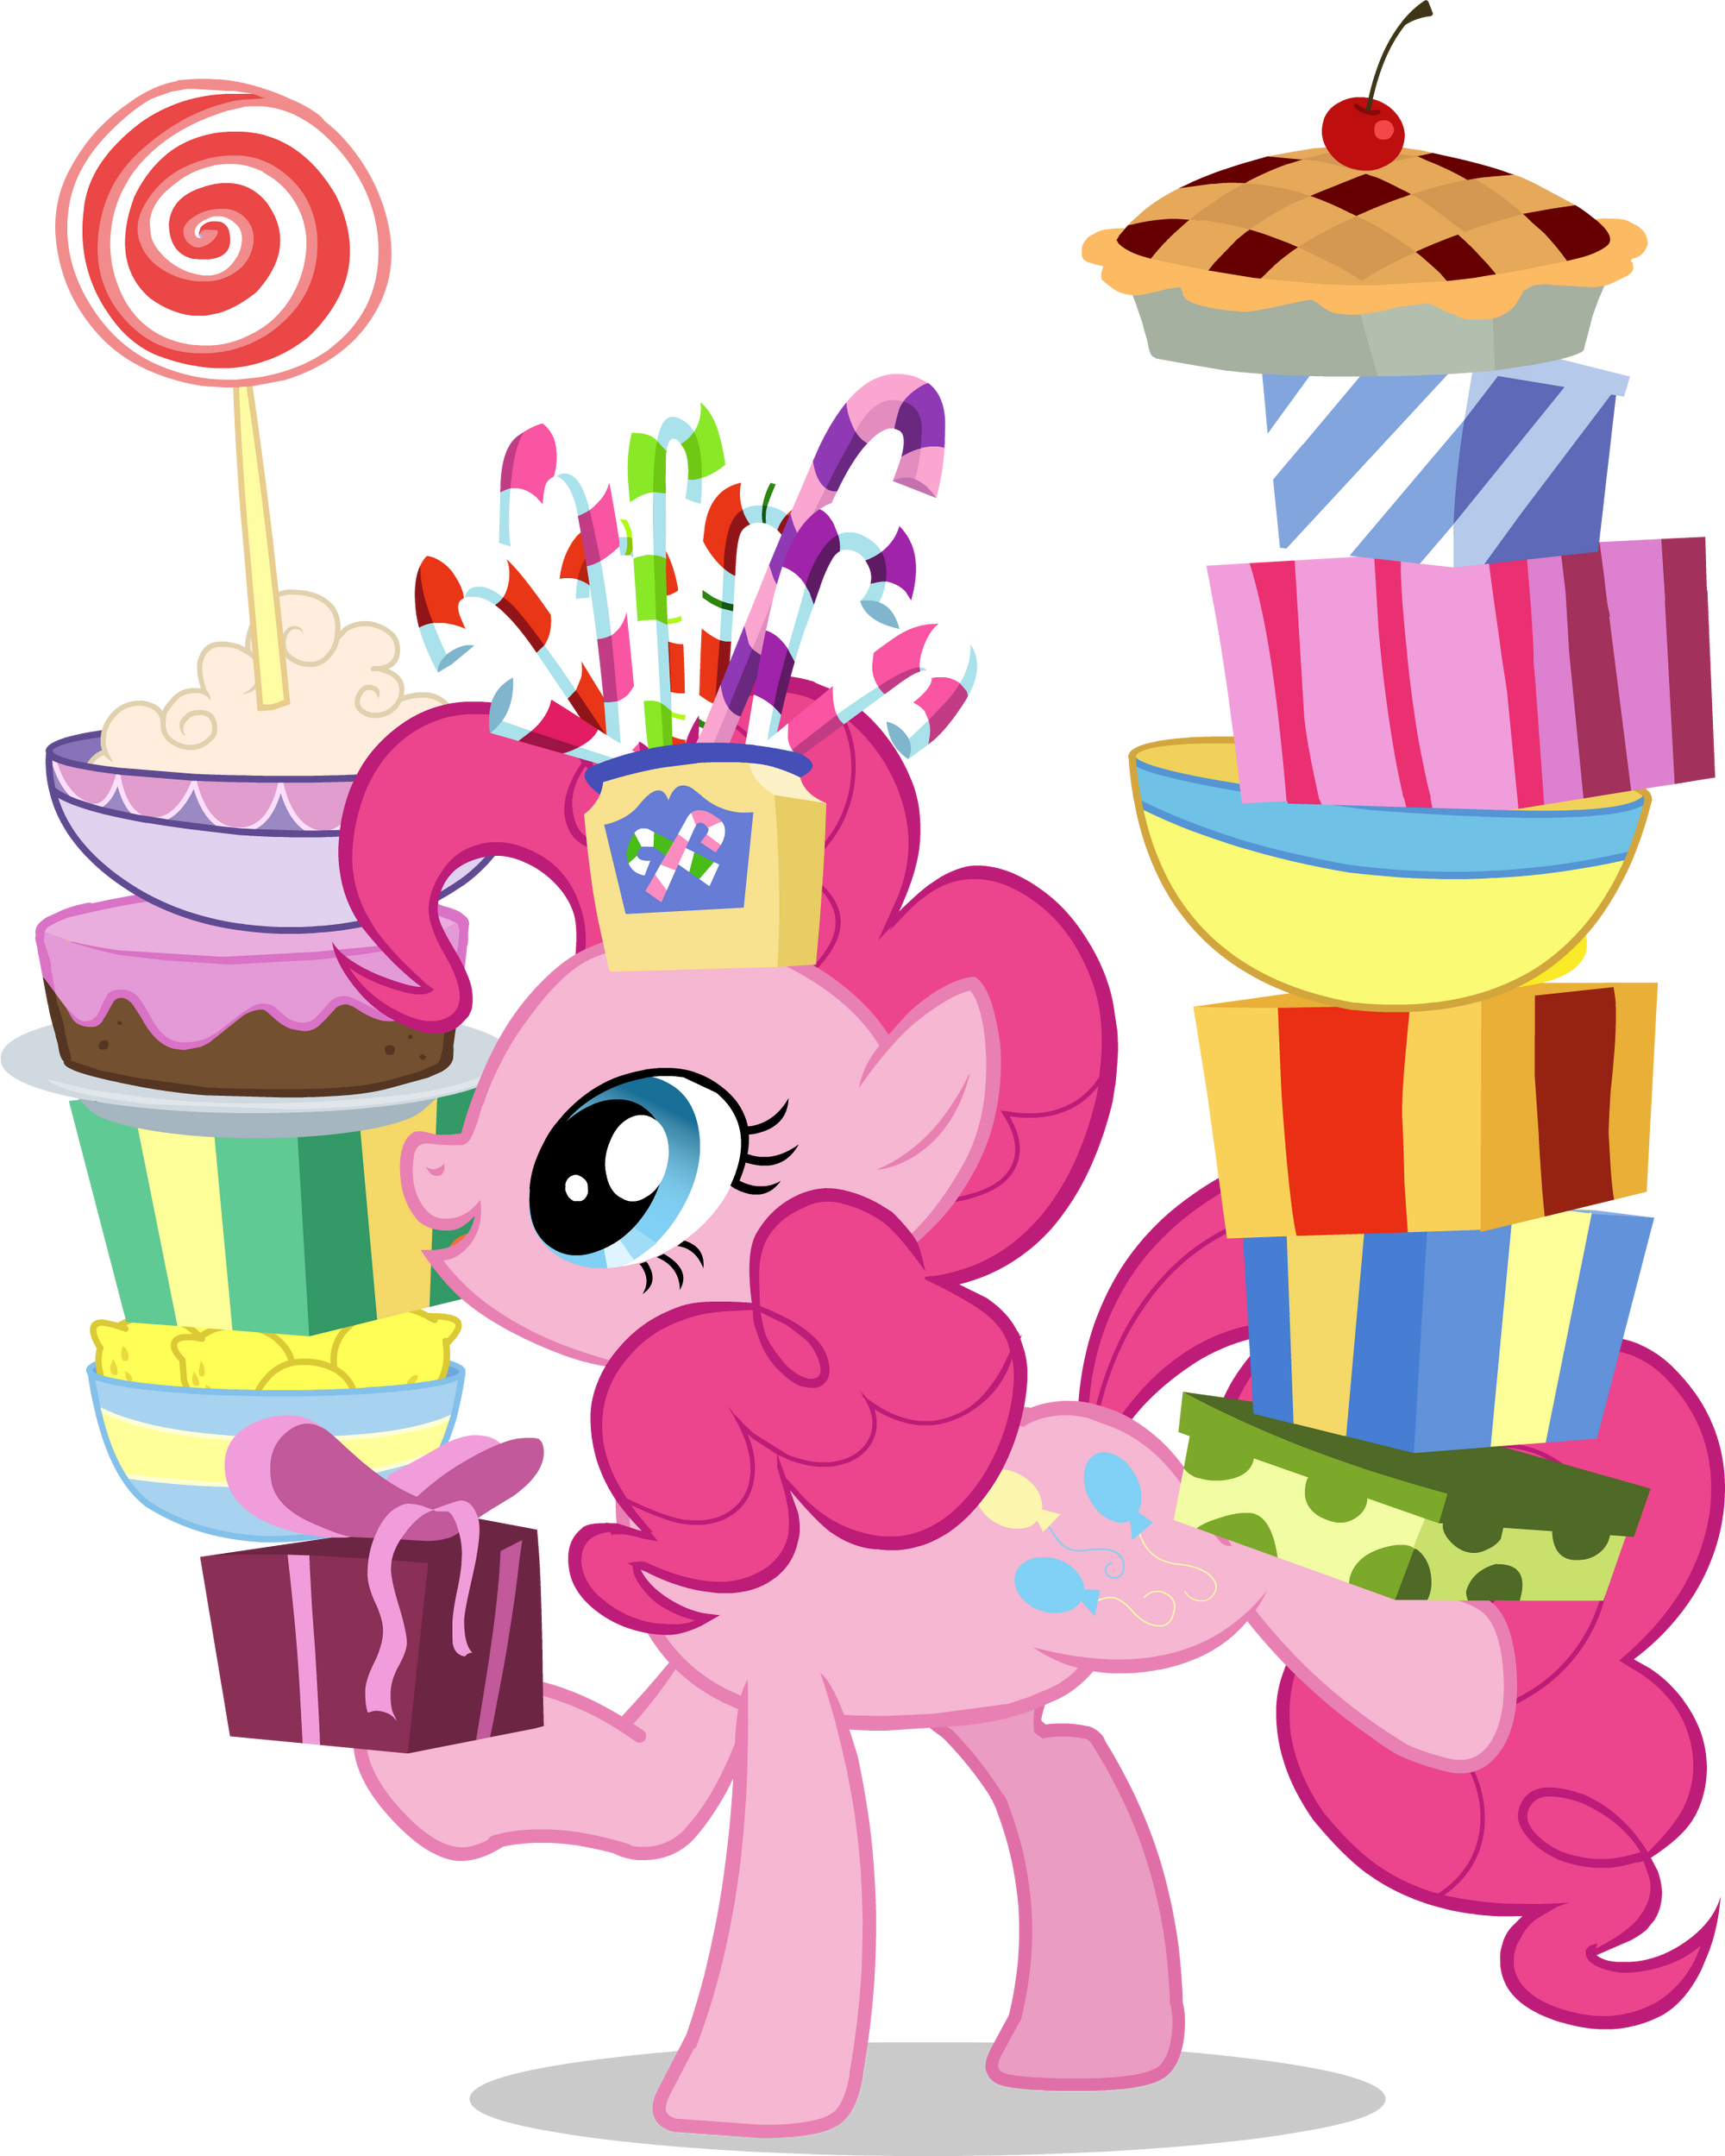 https://vignette.wikia.nocookie.net/mlp/images/7/7b/AiP_PinkiePie4.png/revision/latest/scale-to-width-down/2000?cb=20120720153153